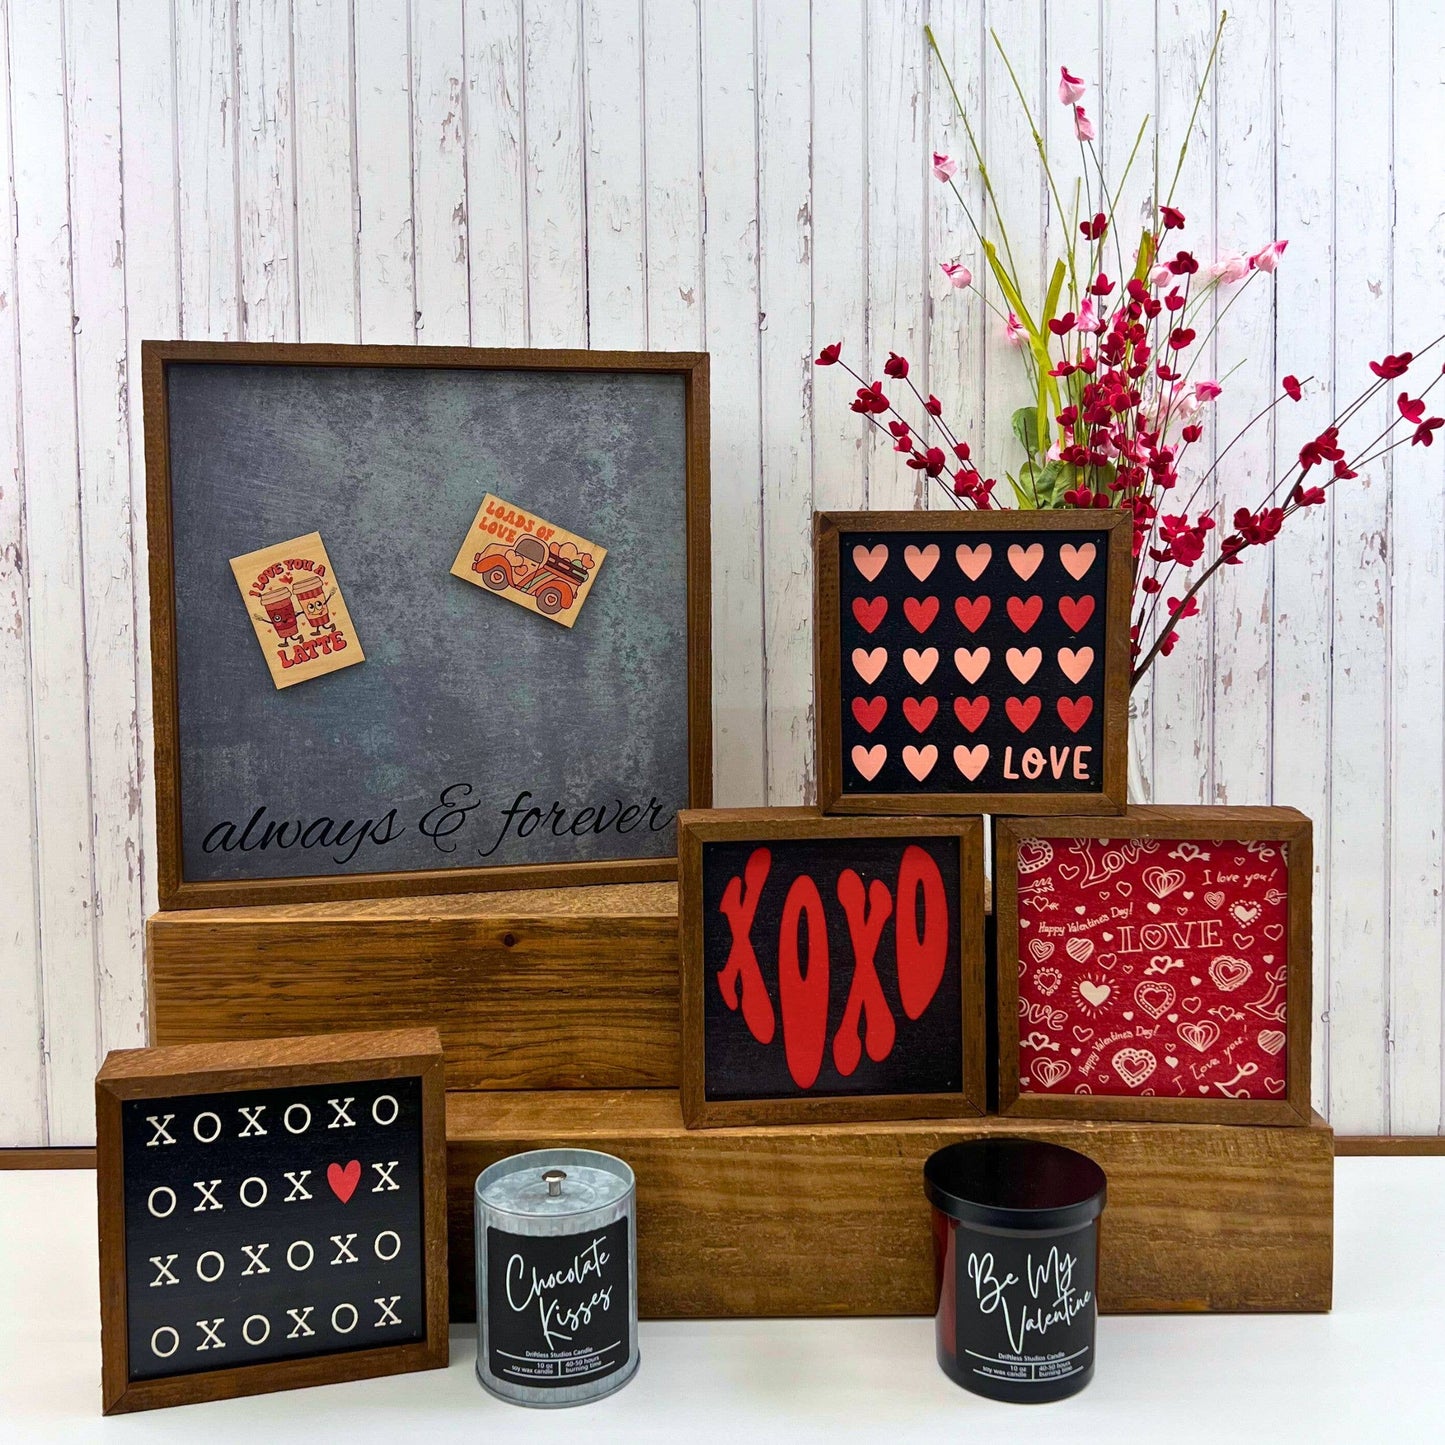 6x6 Love "Hearts" Valentines Day - Home Décor